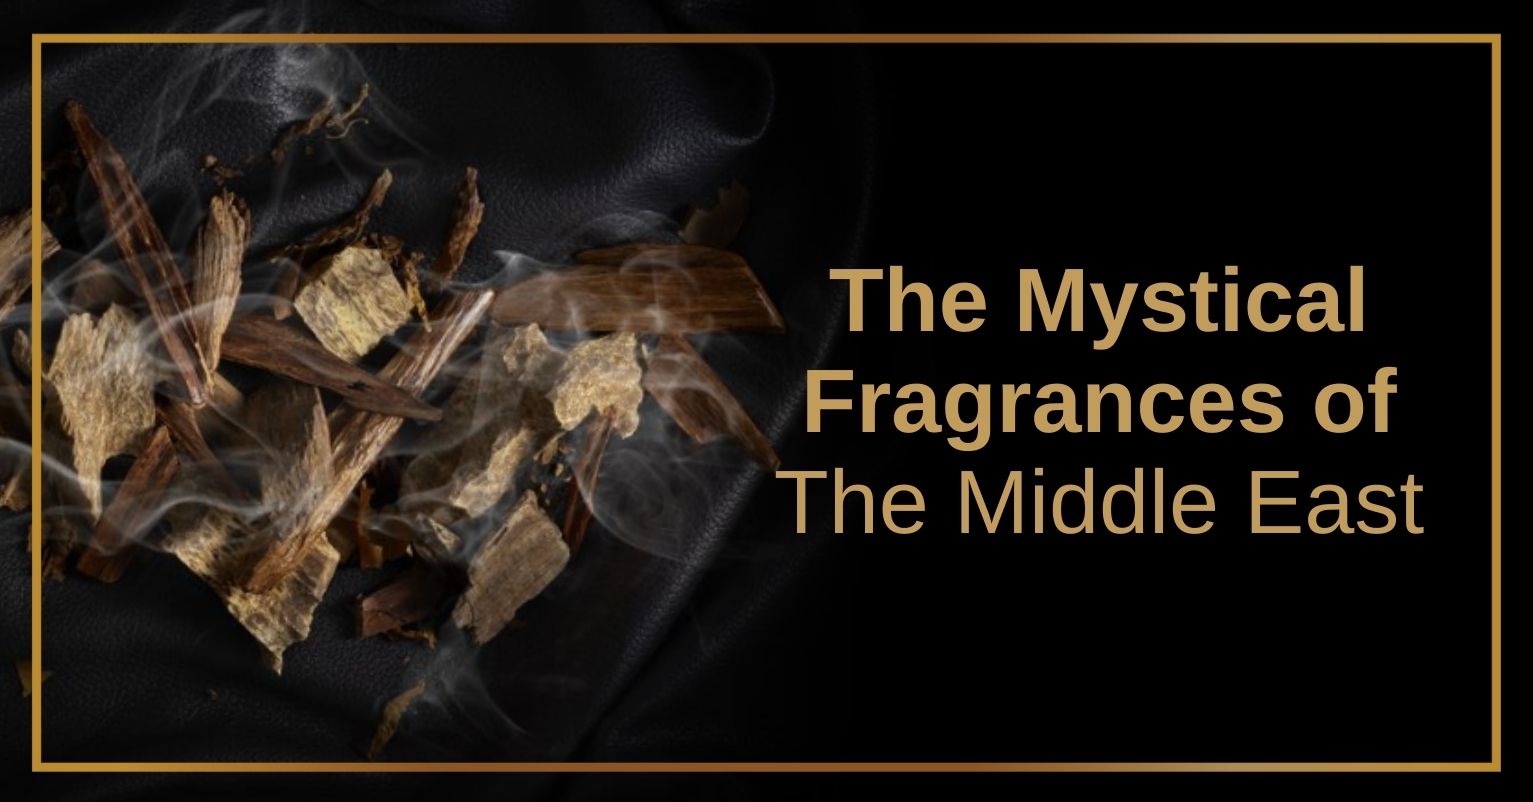 The Mystical Fragrances of the Middle East